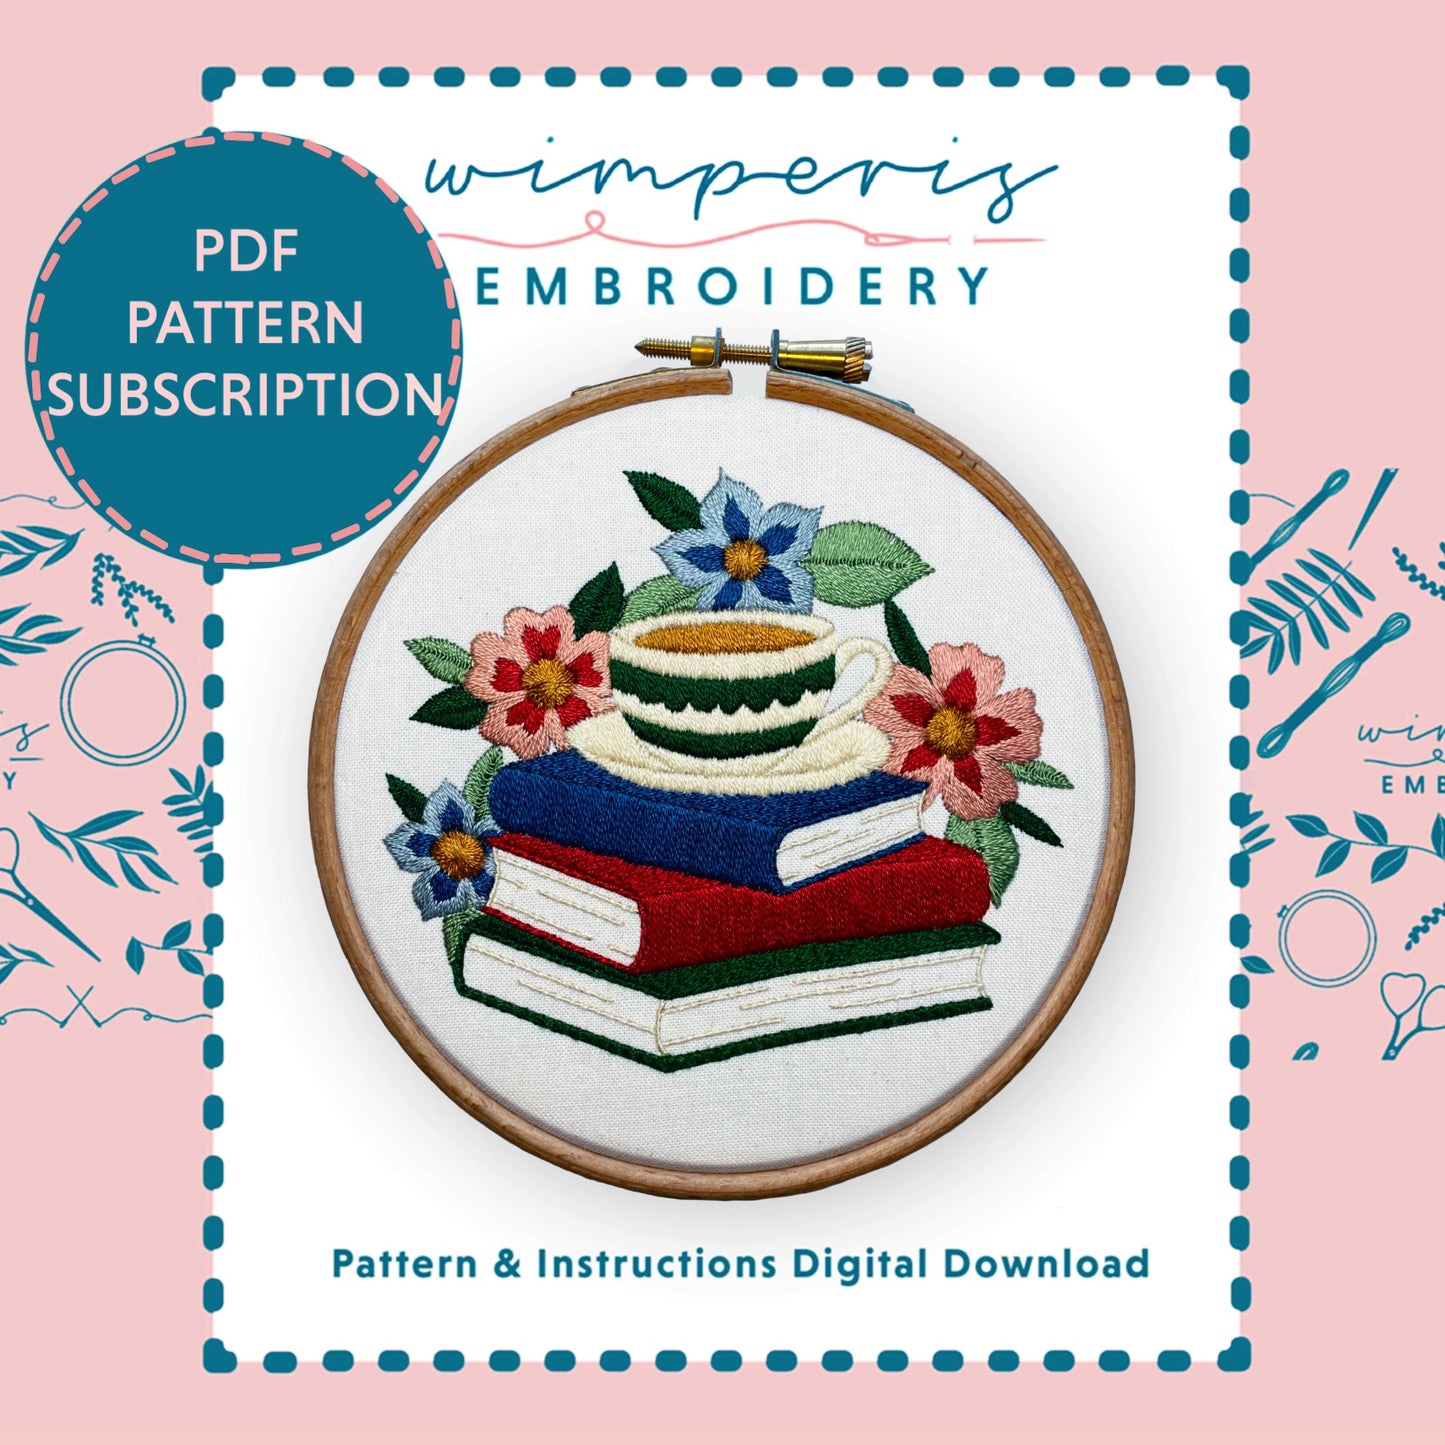 PDF Embroidery Pattern Subscription - digital download